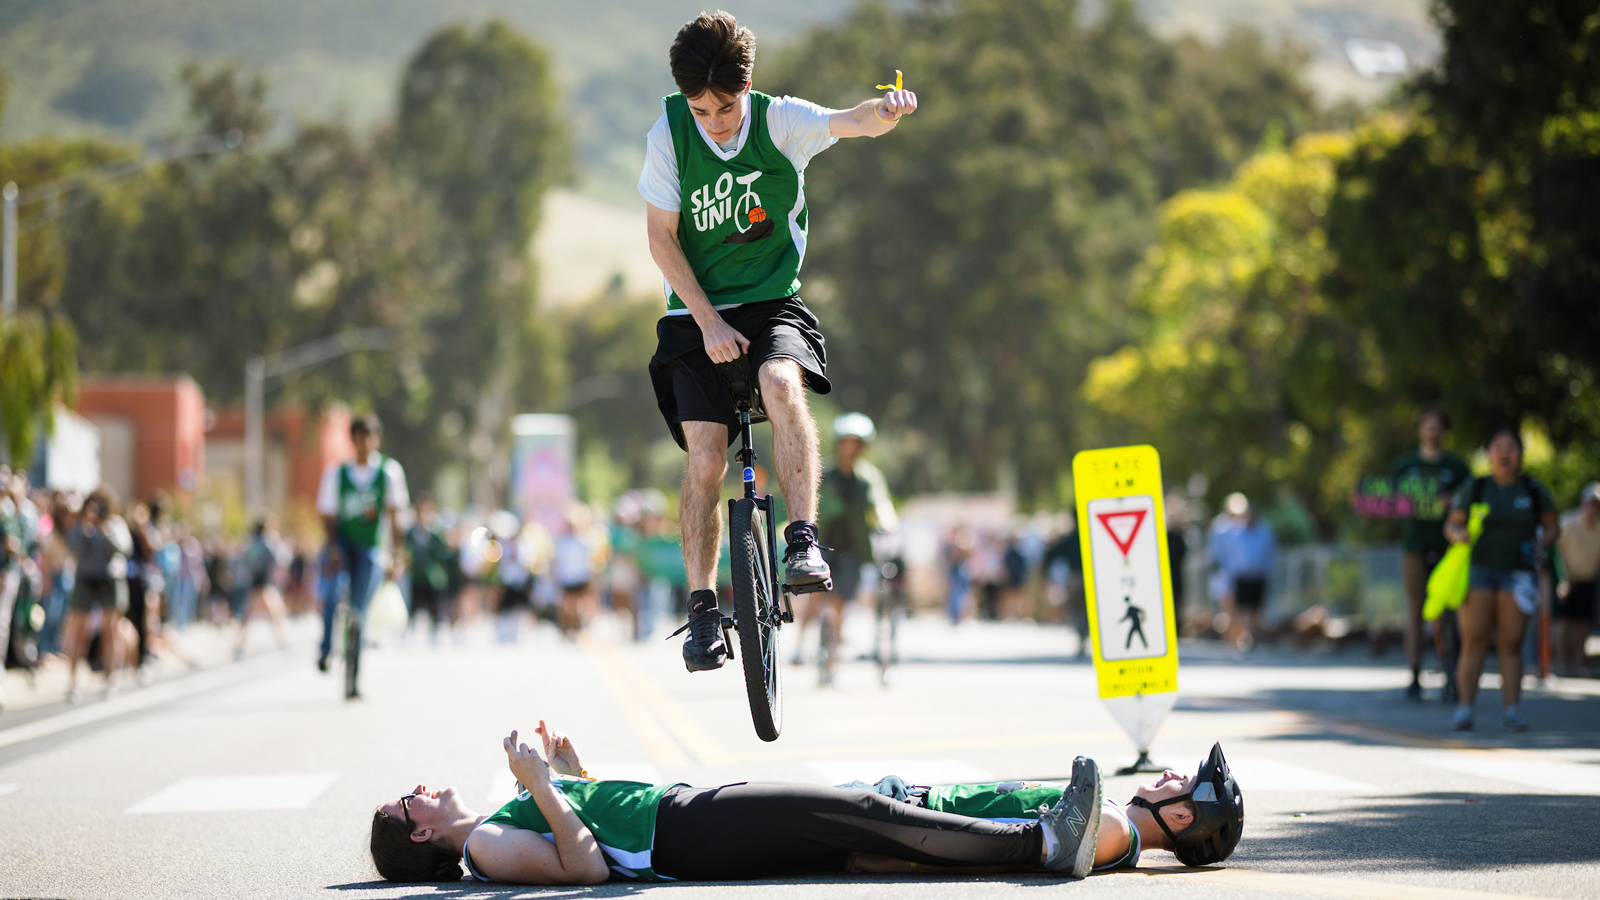 The Poly Royal Parade included a host of student performances, including a unicyclist performing a high-stakes stunt